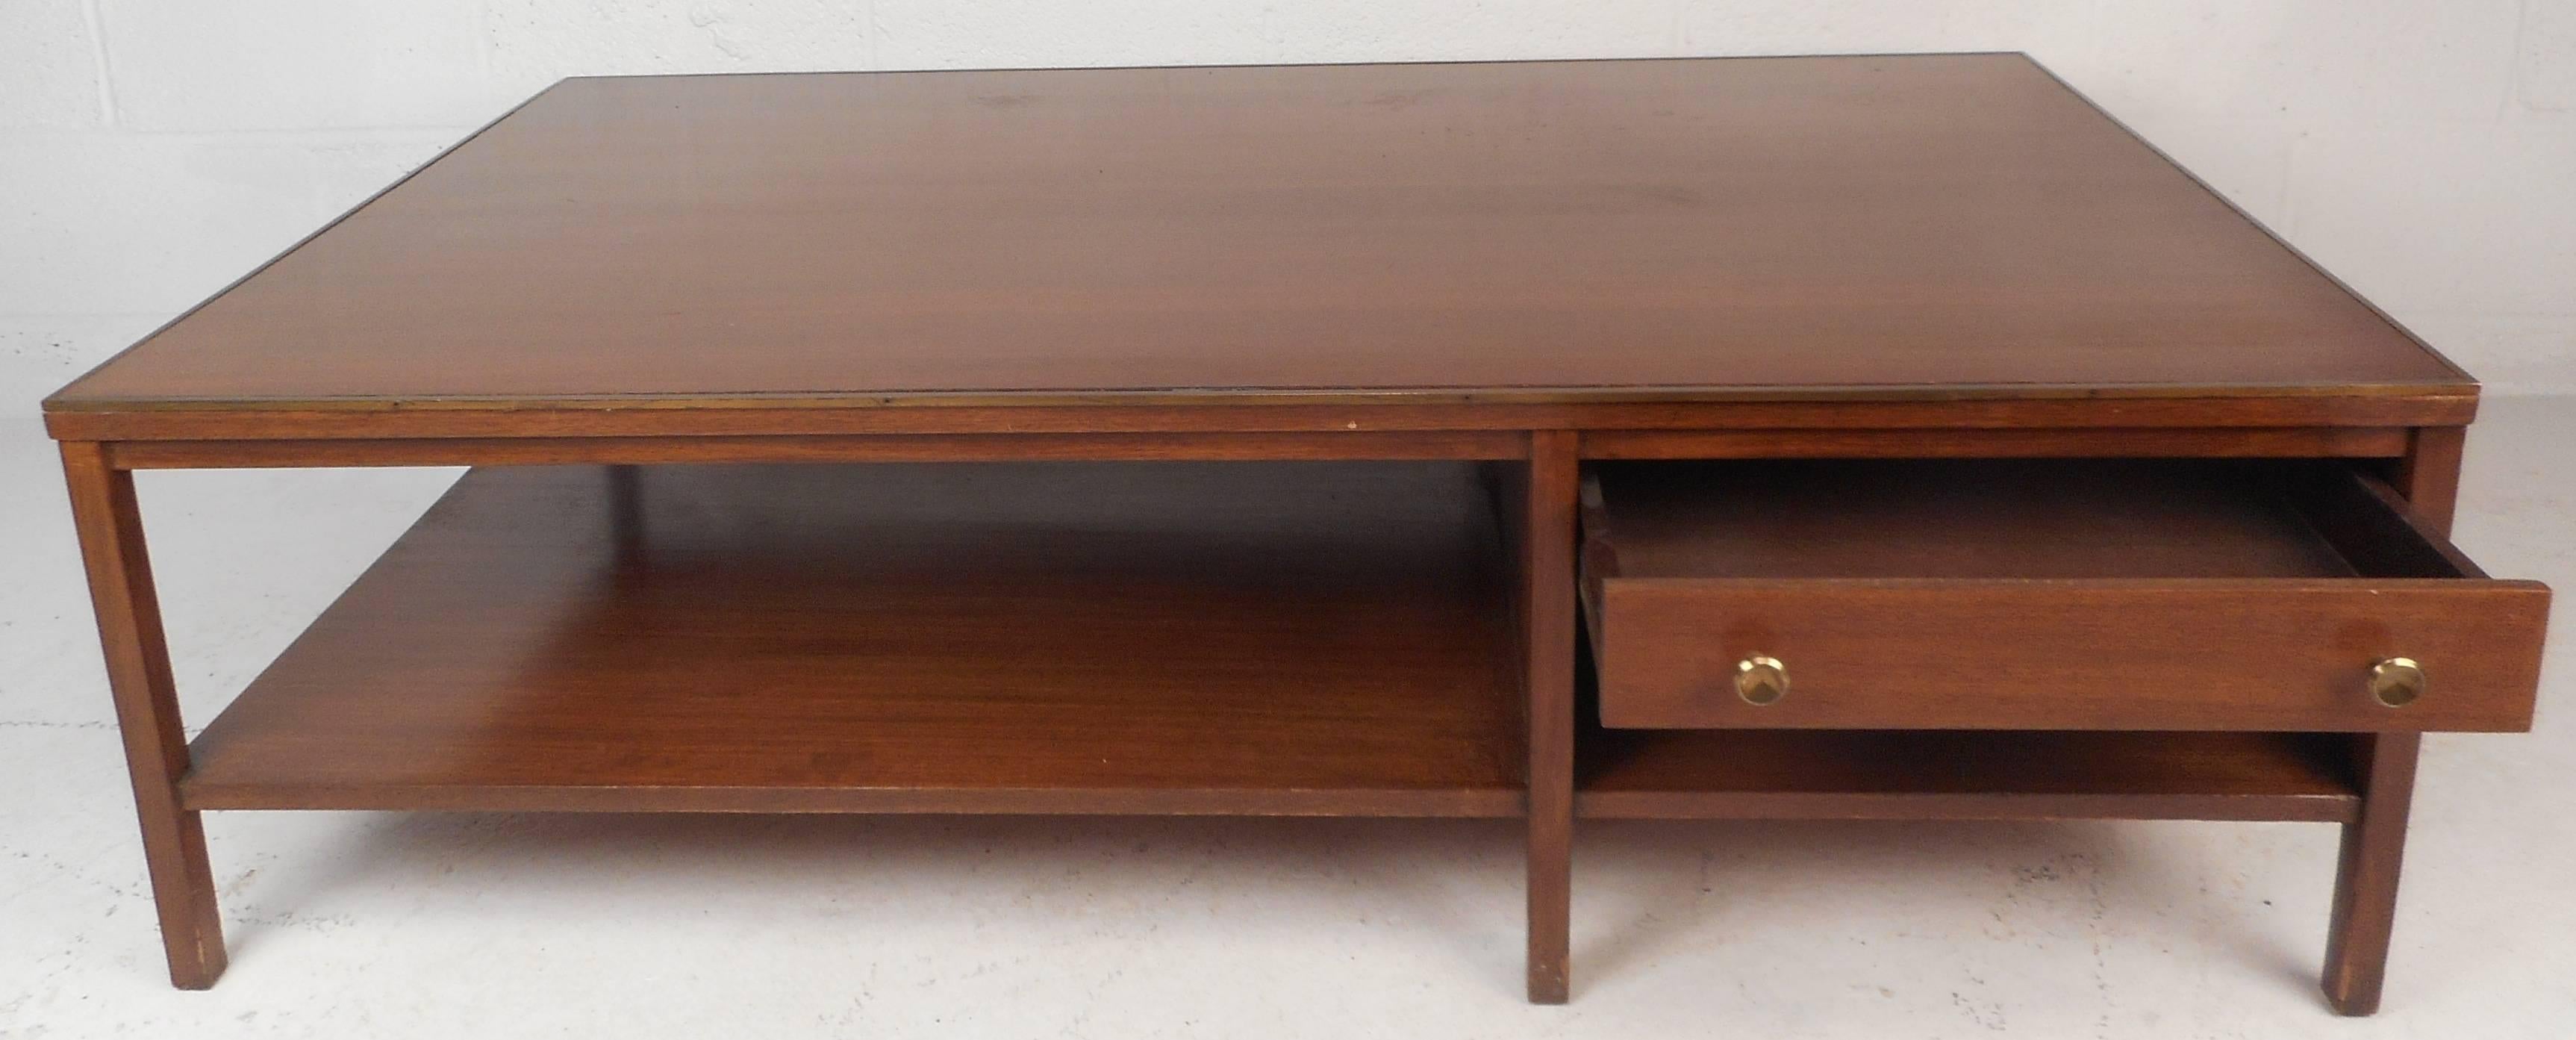 American Mid-Century Modern Walnut Coffee Table in the Style of Paul McCobb For Sale